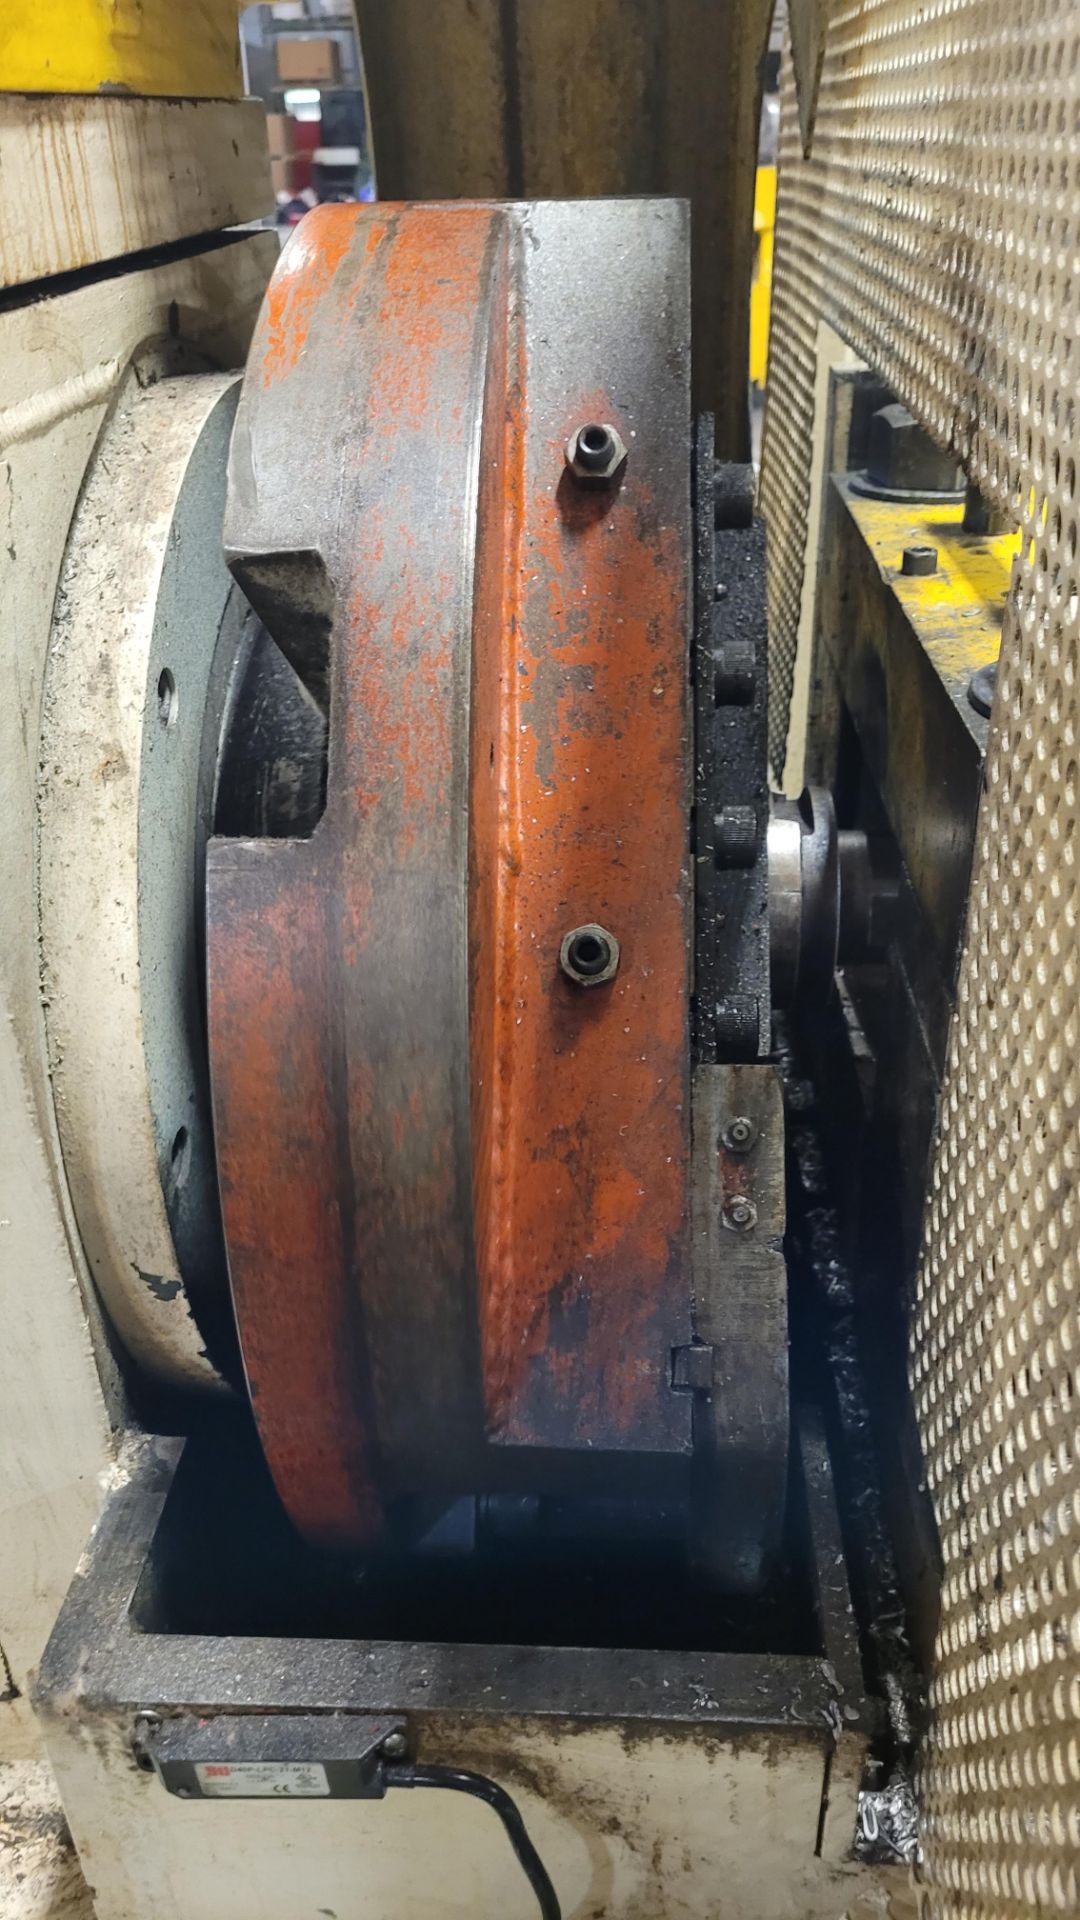 DICKEY & SON MULTI CYCLE ROTARY FORM NOTCH MACHINE MODEL 3 1/2, S/N 275 (RIGGING FEE $550) - Image 5 of 7